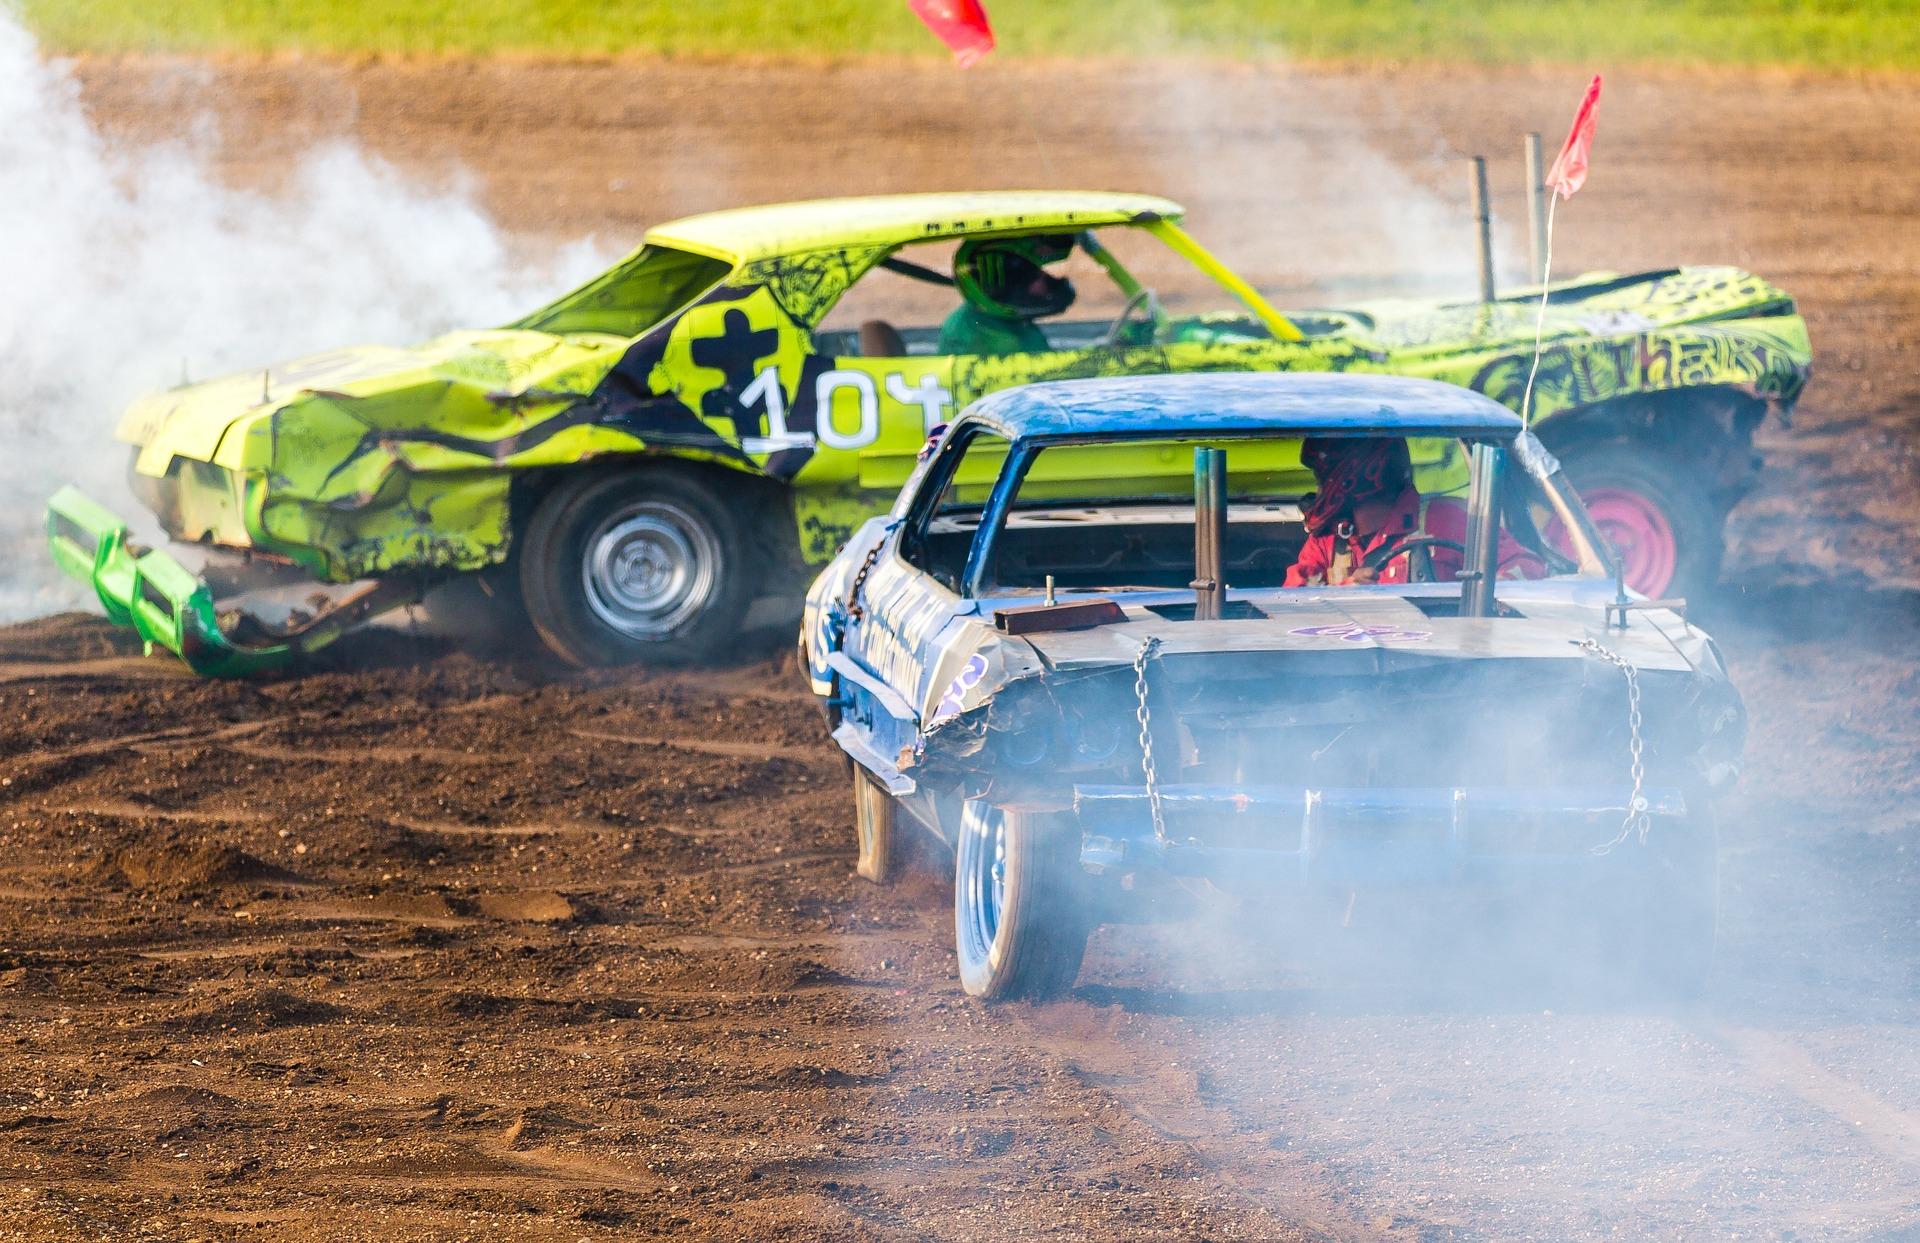 2 cars crashing into each other in the middle of a dirt field